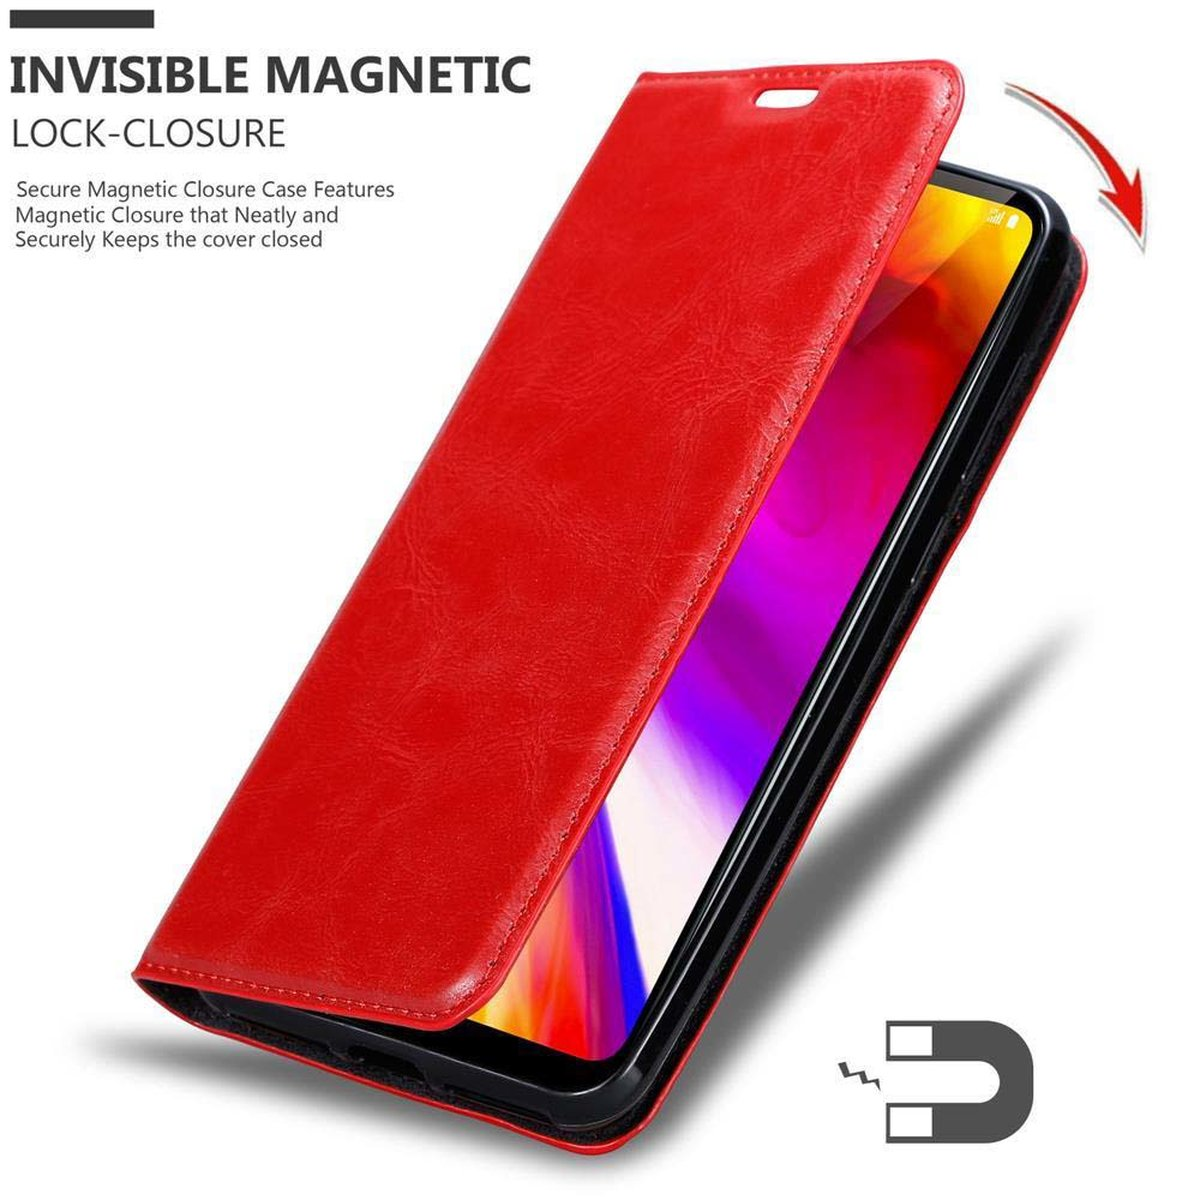 Book G7 ROT ONE, / / Hülle Invisible CADORABO ThinQ Bookcover, APFEL LG, FIT Magnet,